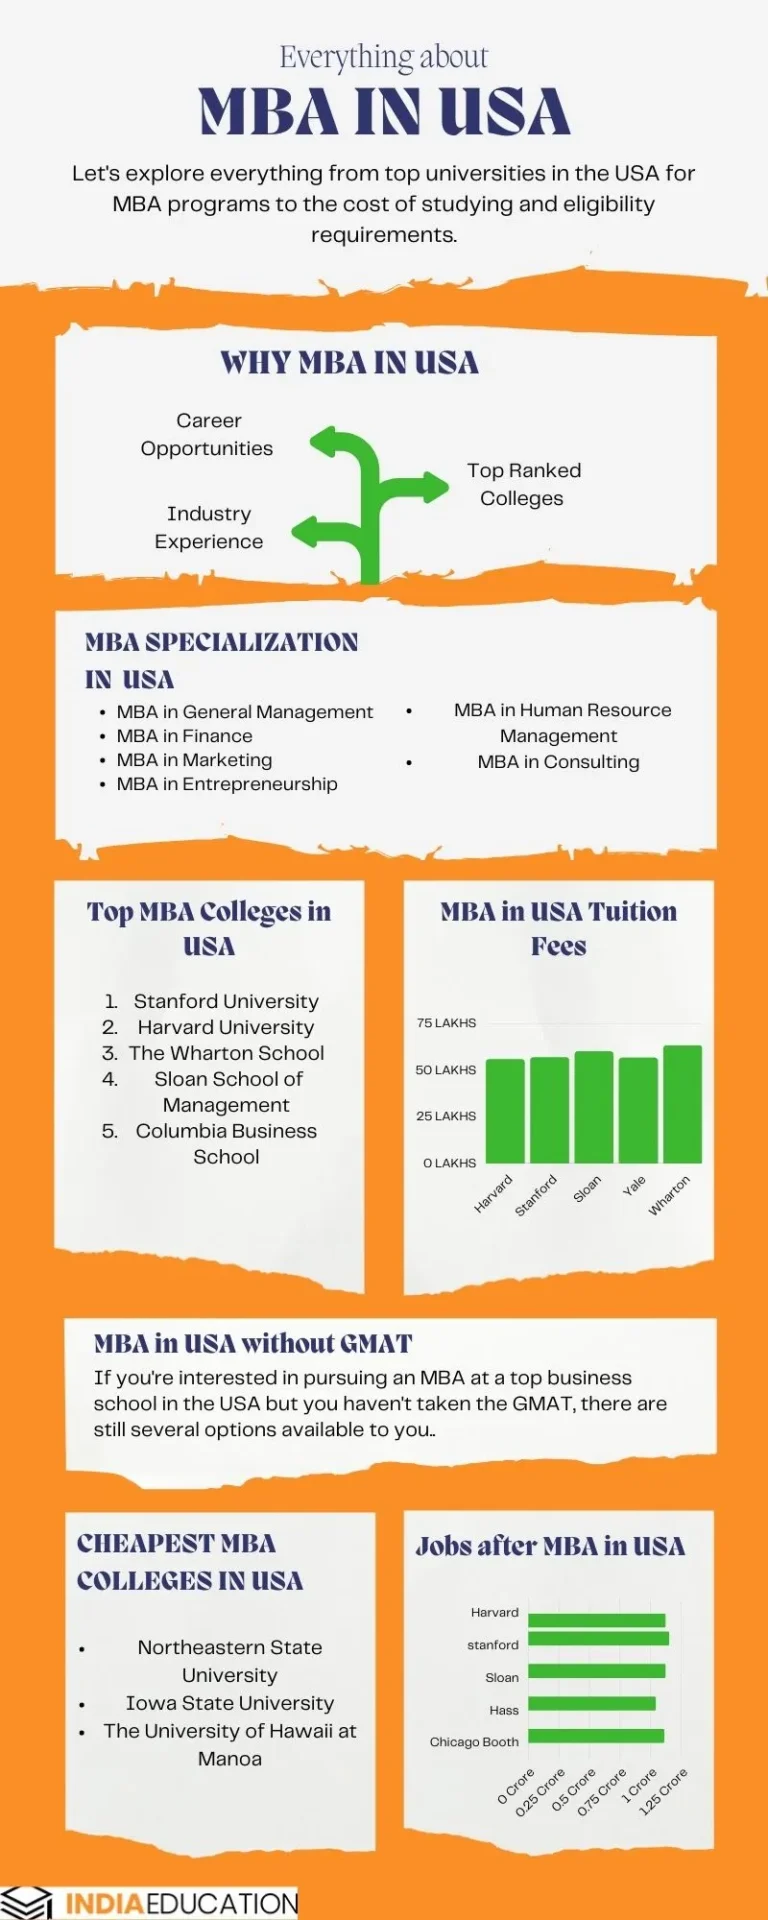 MBA in USA- Top colleges, fees, scholarships and jobs